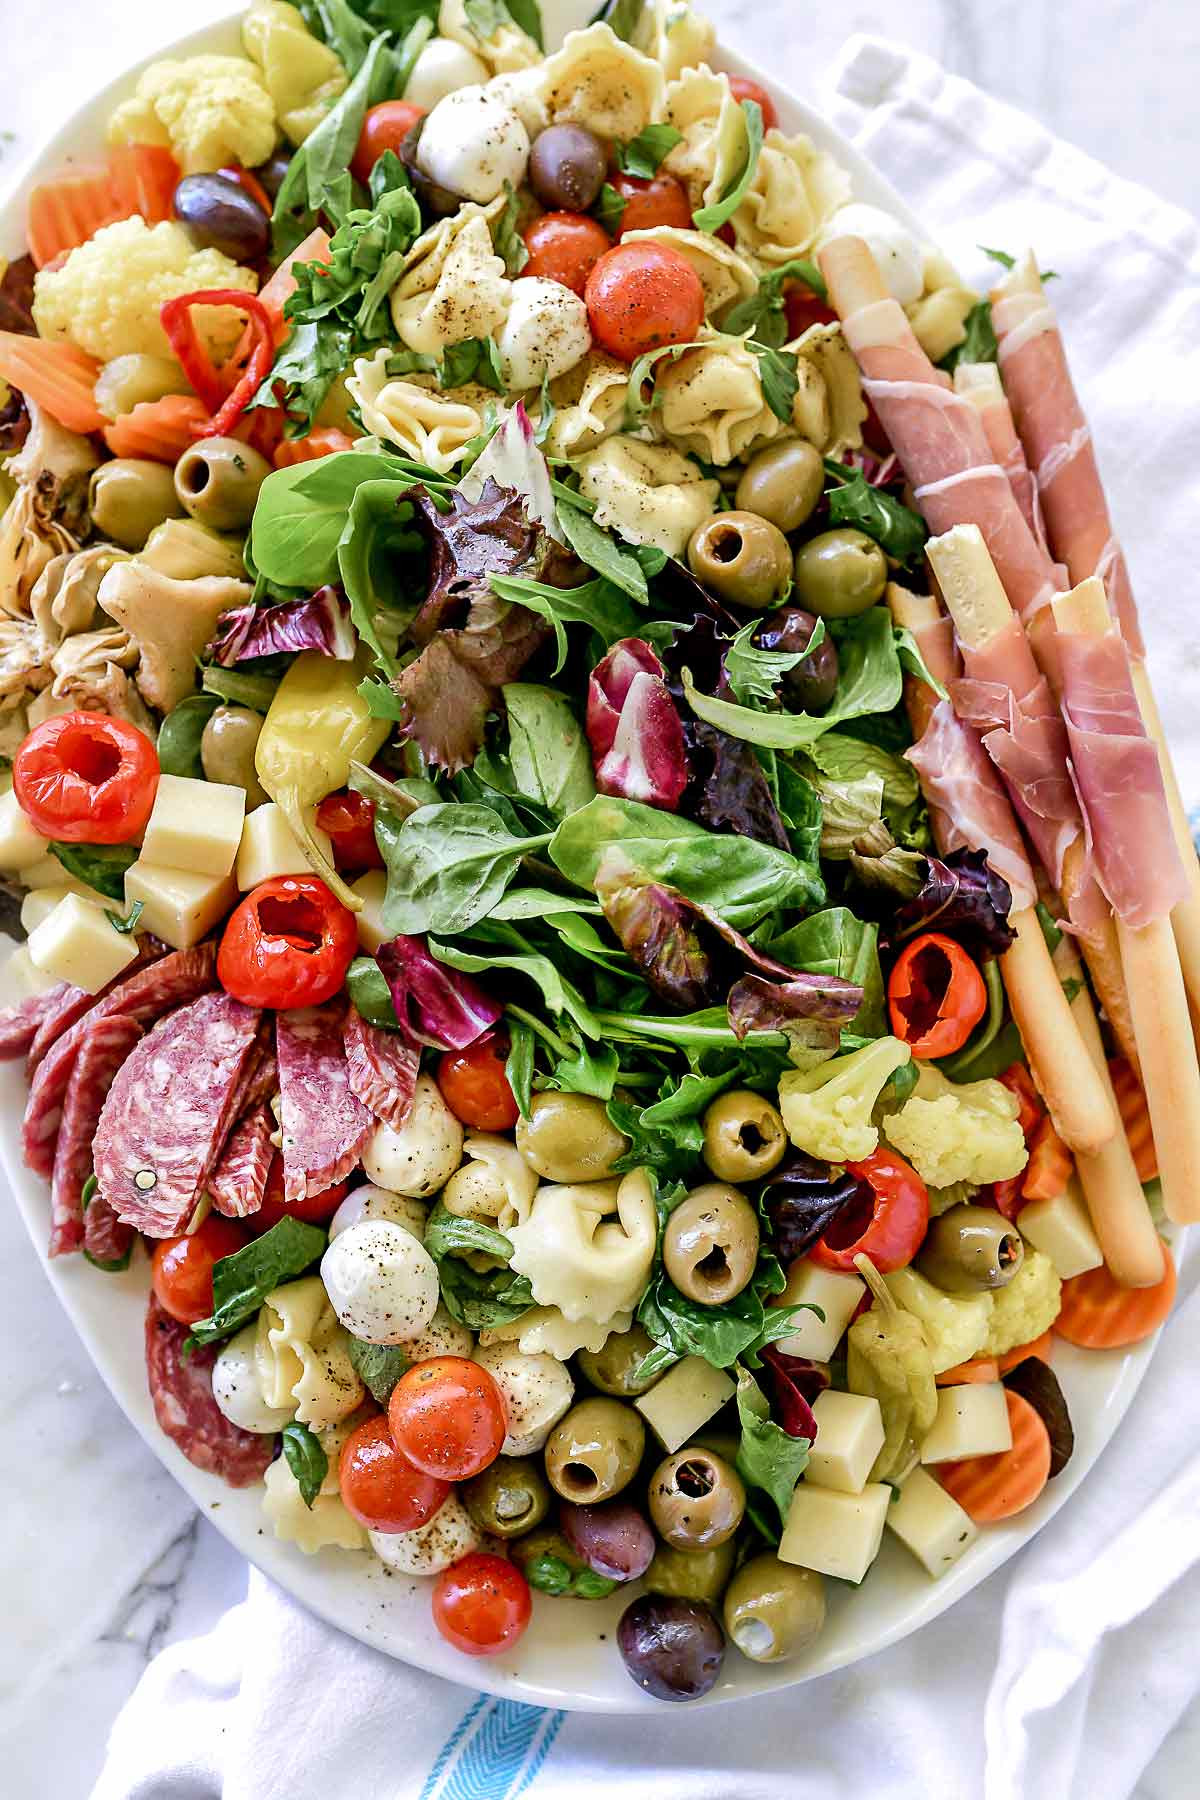 Antipasto Salad Platter Luxury How to Make An Awesome Antipasto Salad Platter